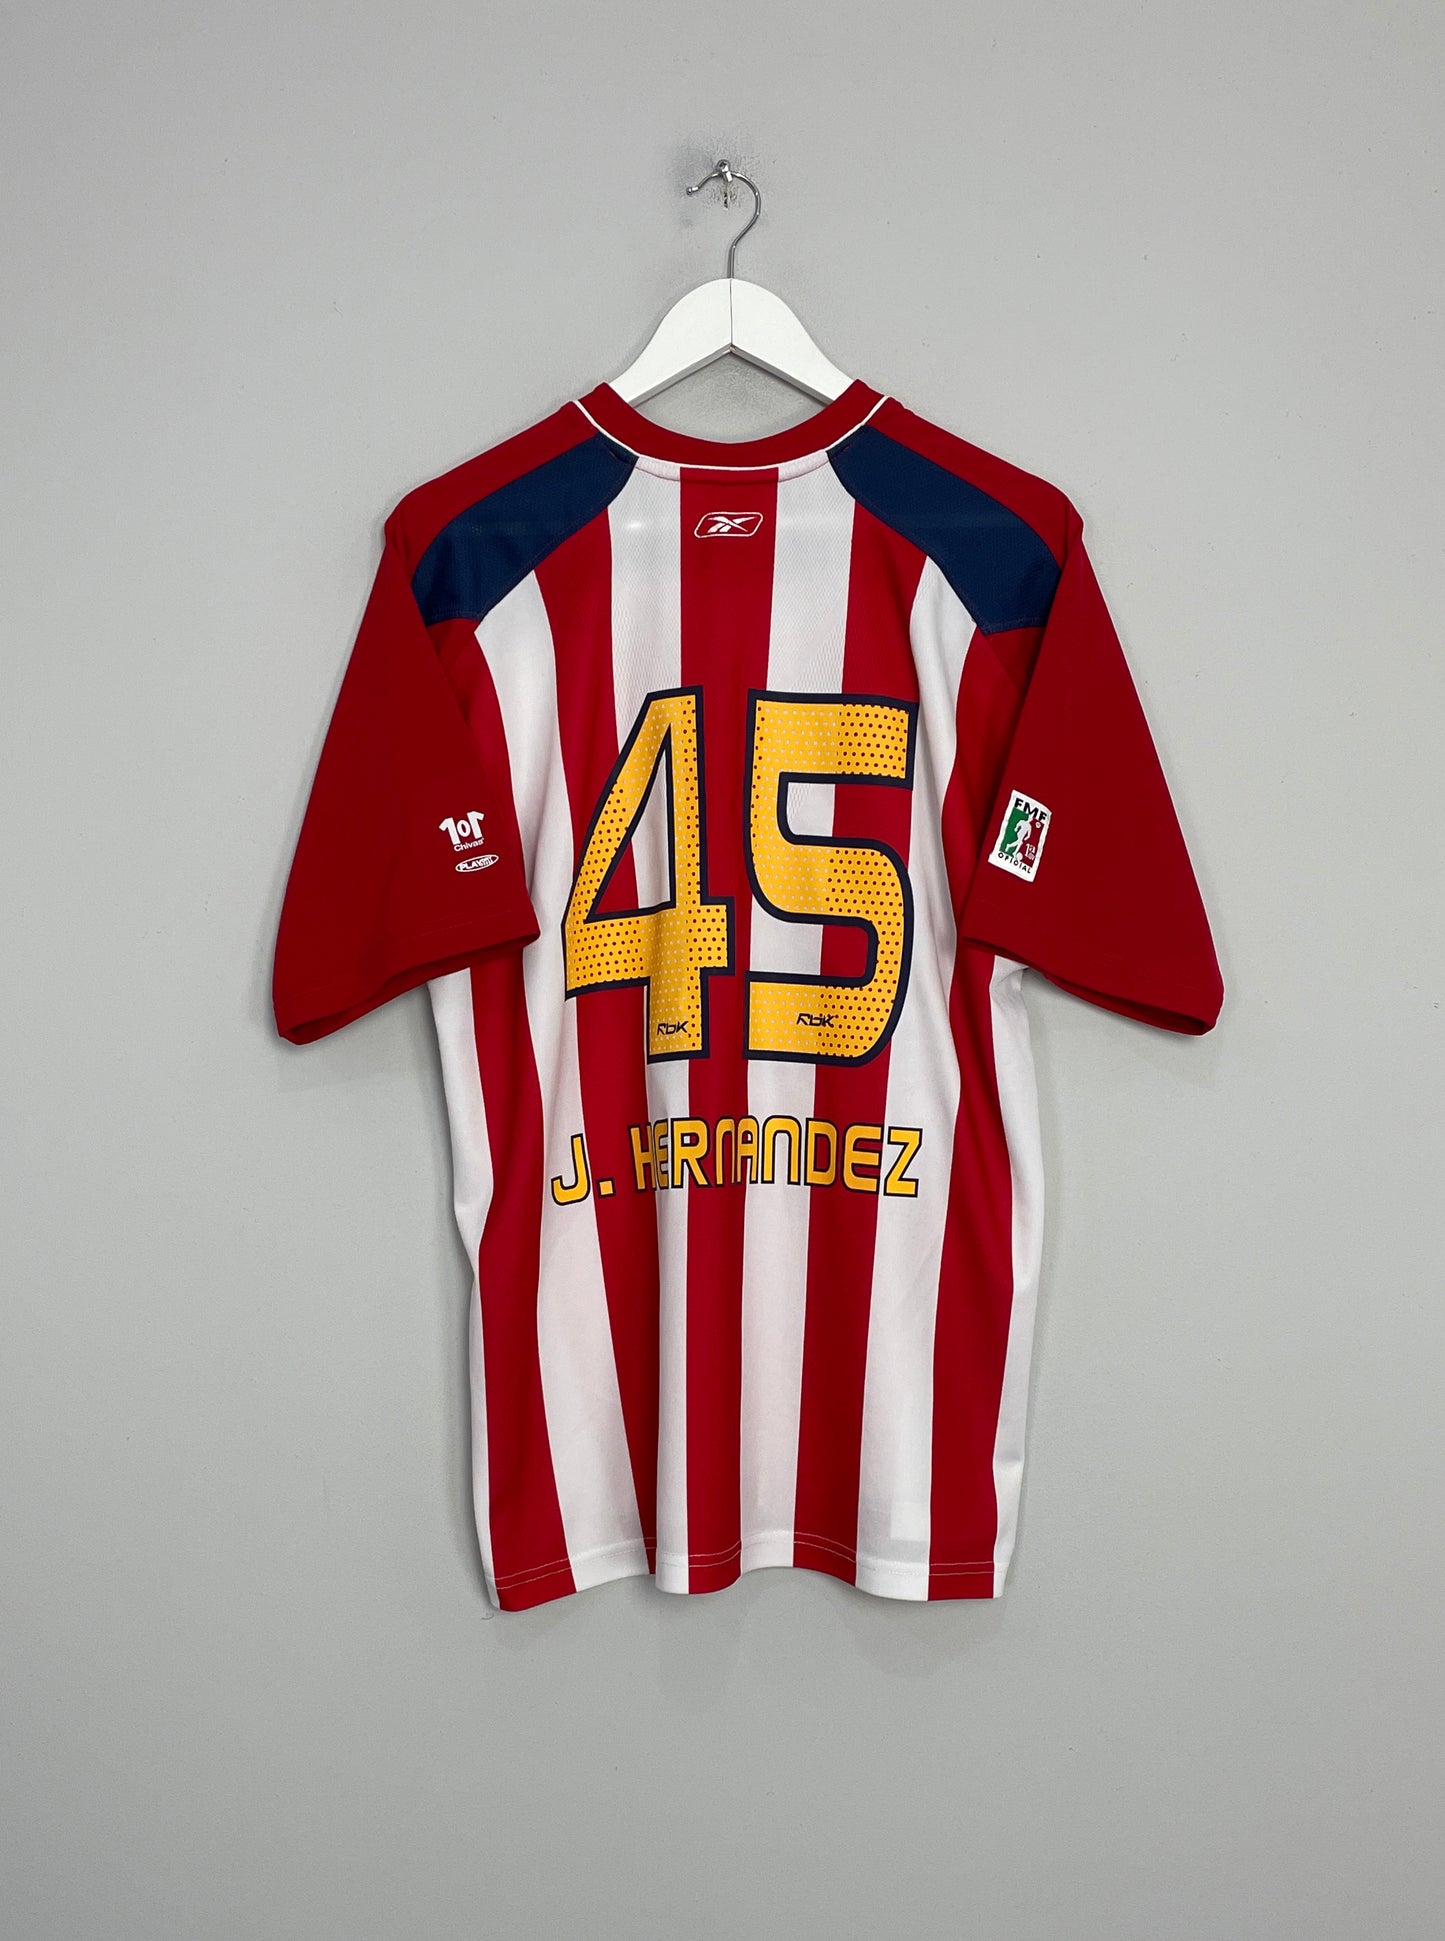 Image of the Chivas shirt from the 2006/07 season